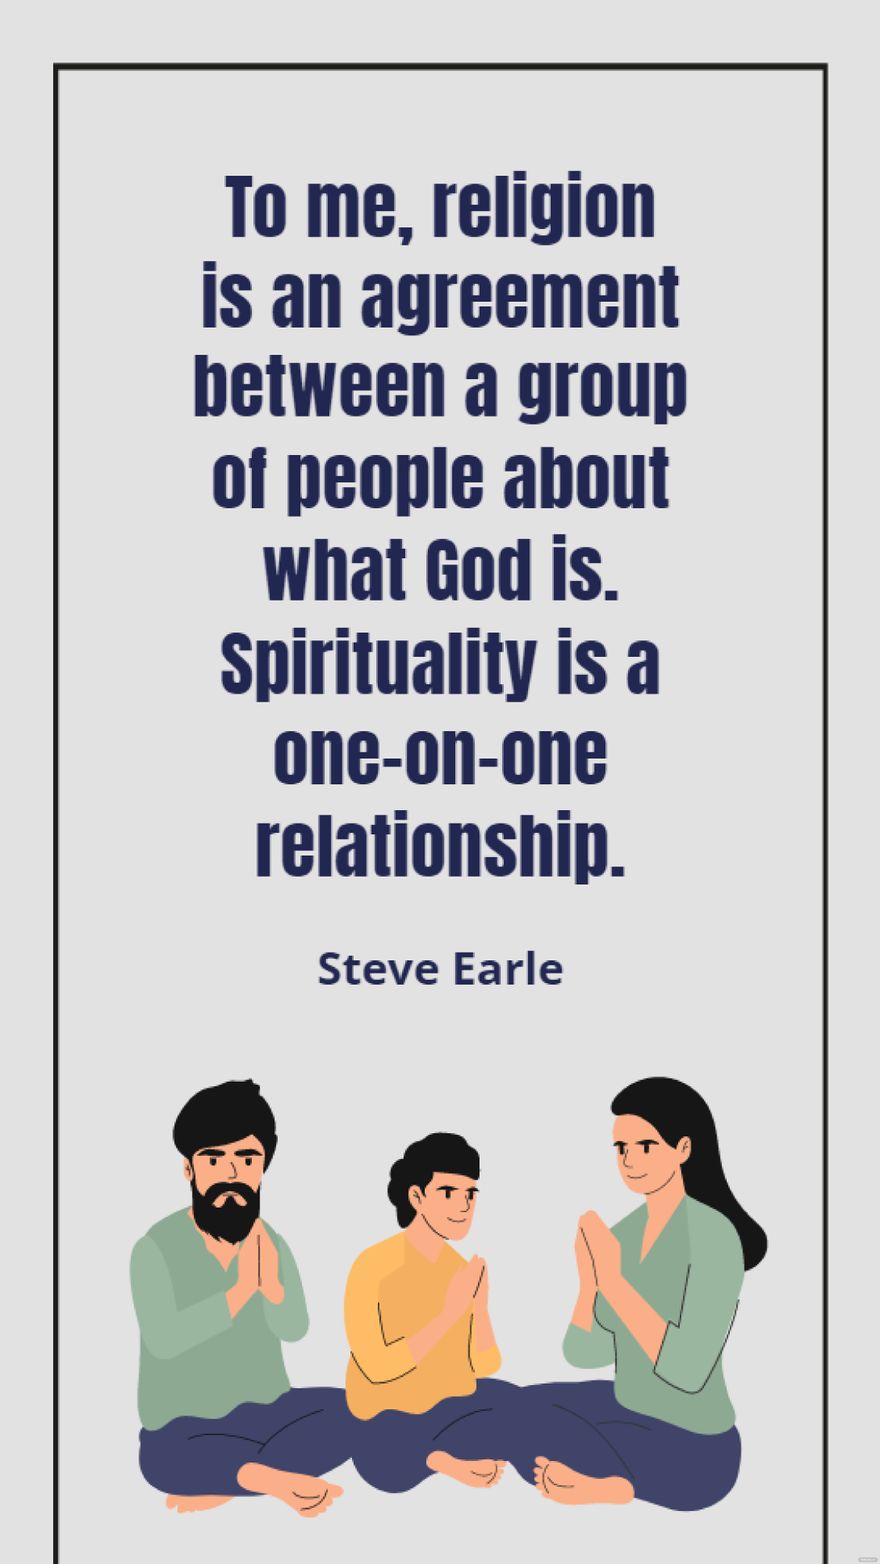 Steve Earle - To me, religion is an agreement between a group of people about what God is. Spirituality is a one-on-one relationship.